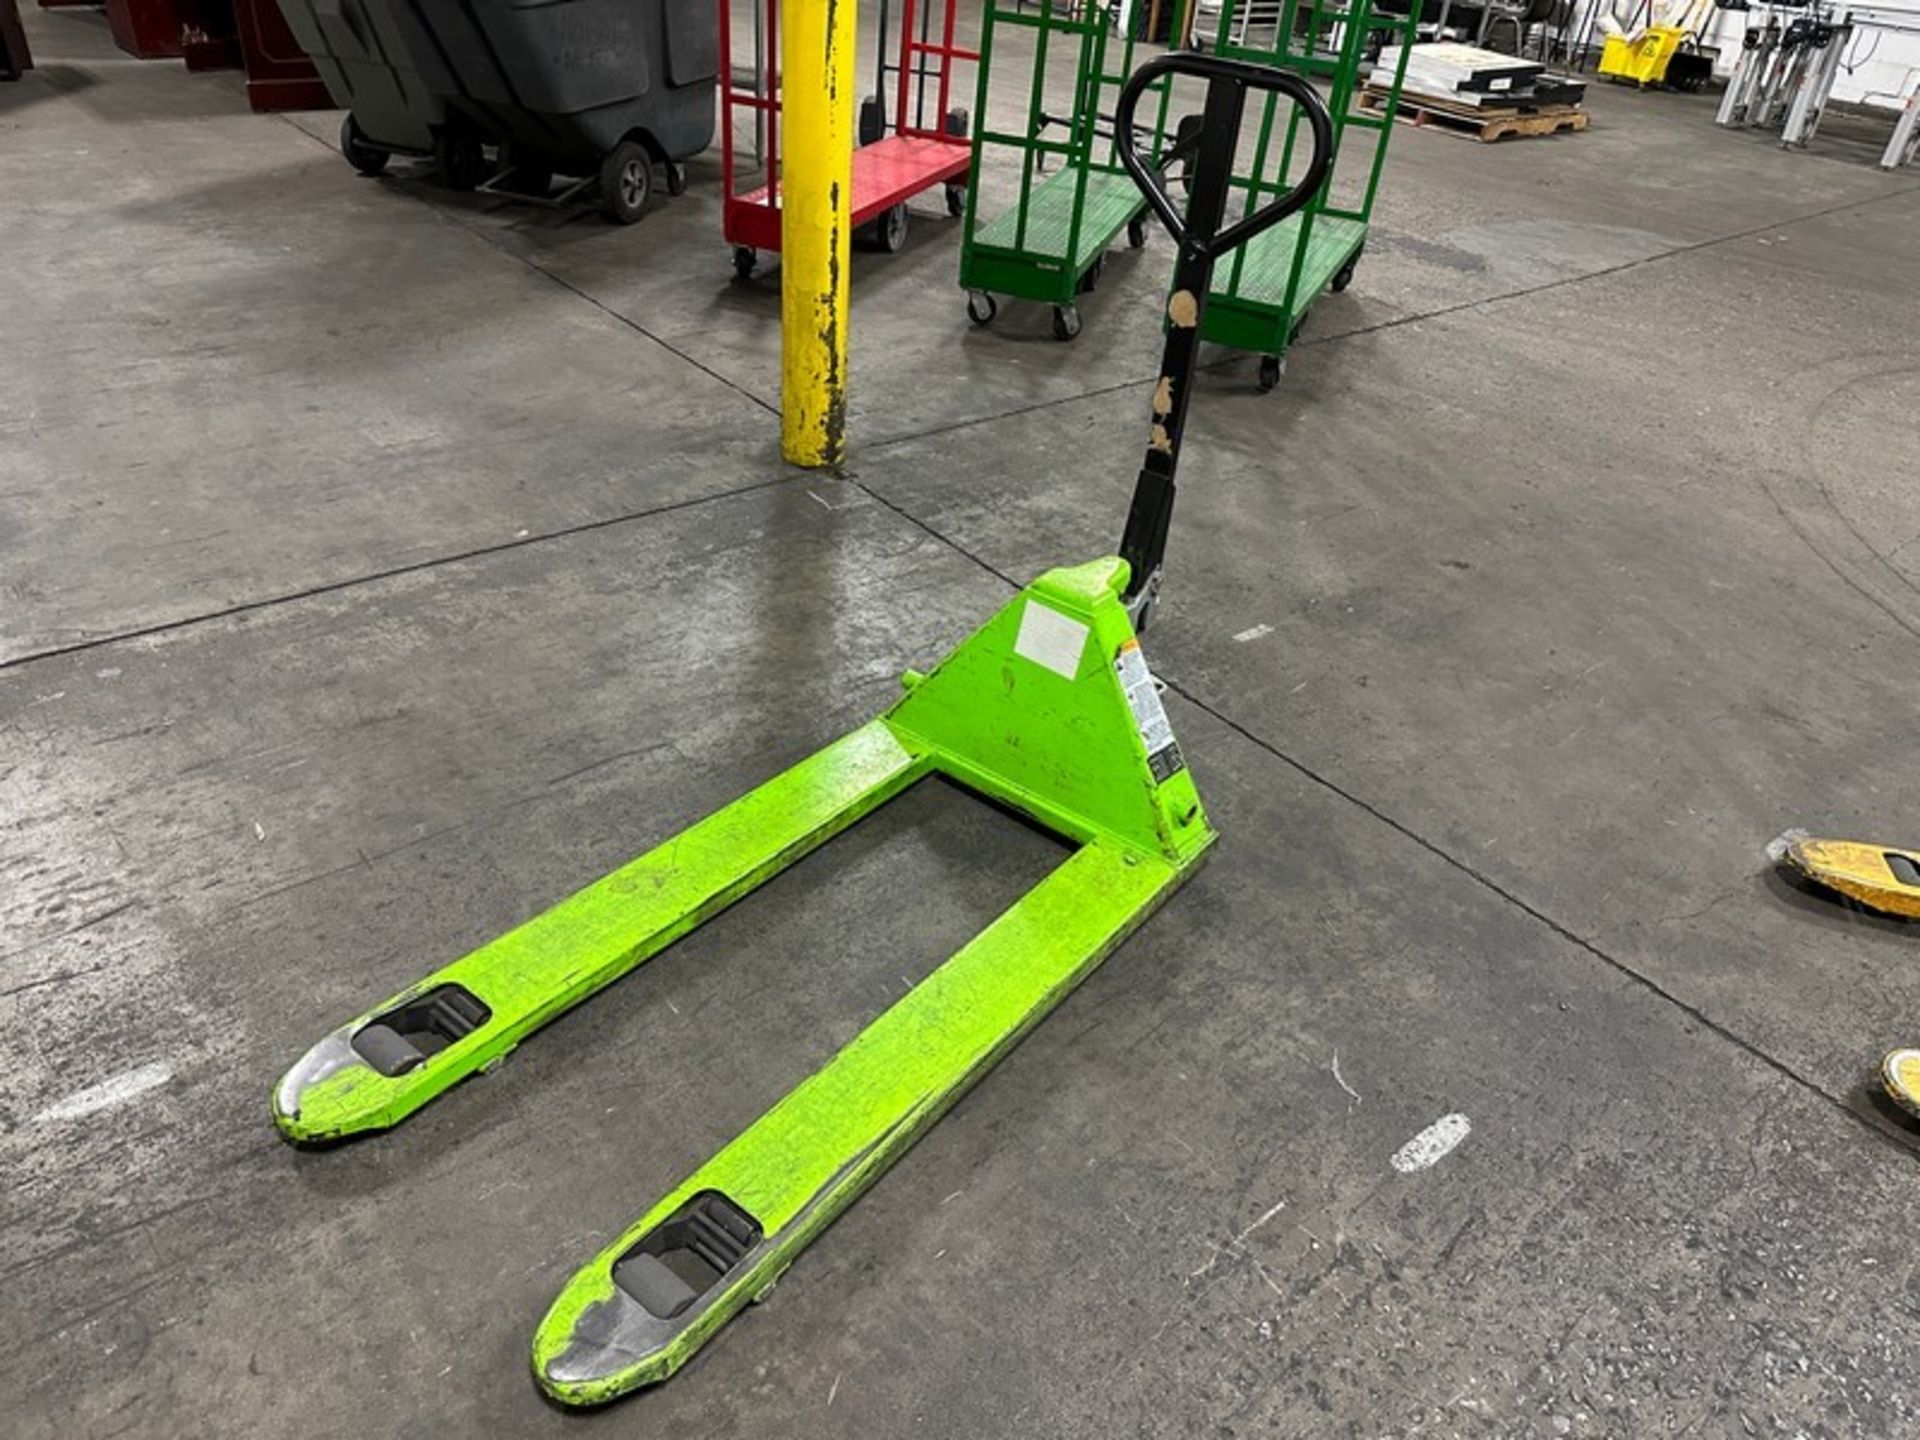 Pallet Jack: Uline 5,500lbs 48 x 27", Lime (Located East Rutherford, NJ) (NOTE: REMOVAL 2-DAYS